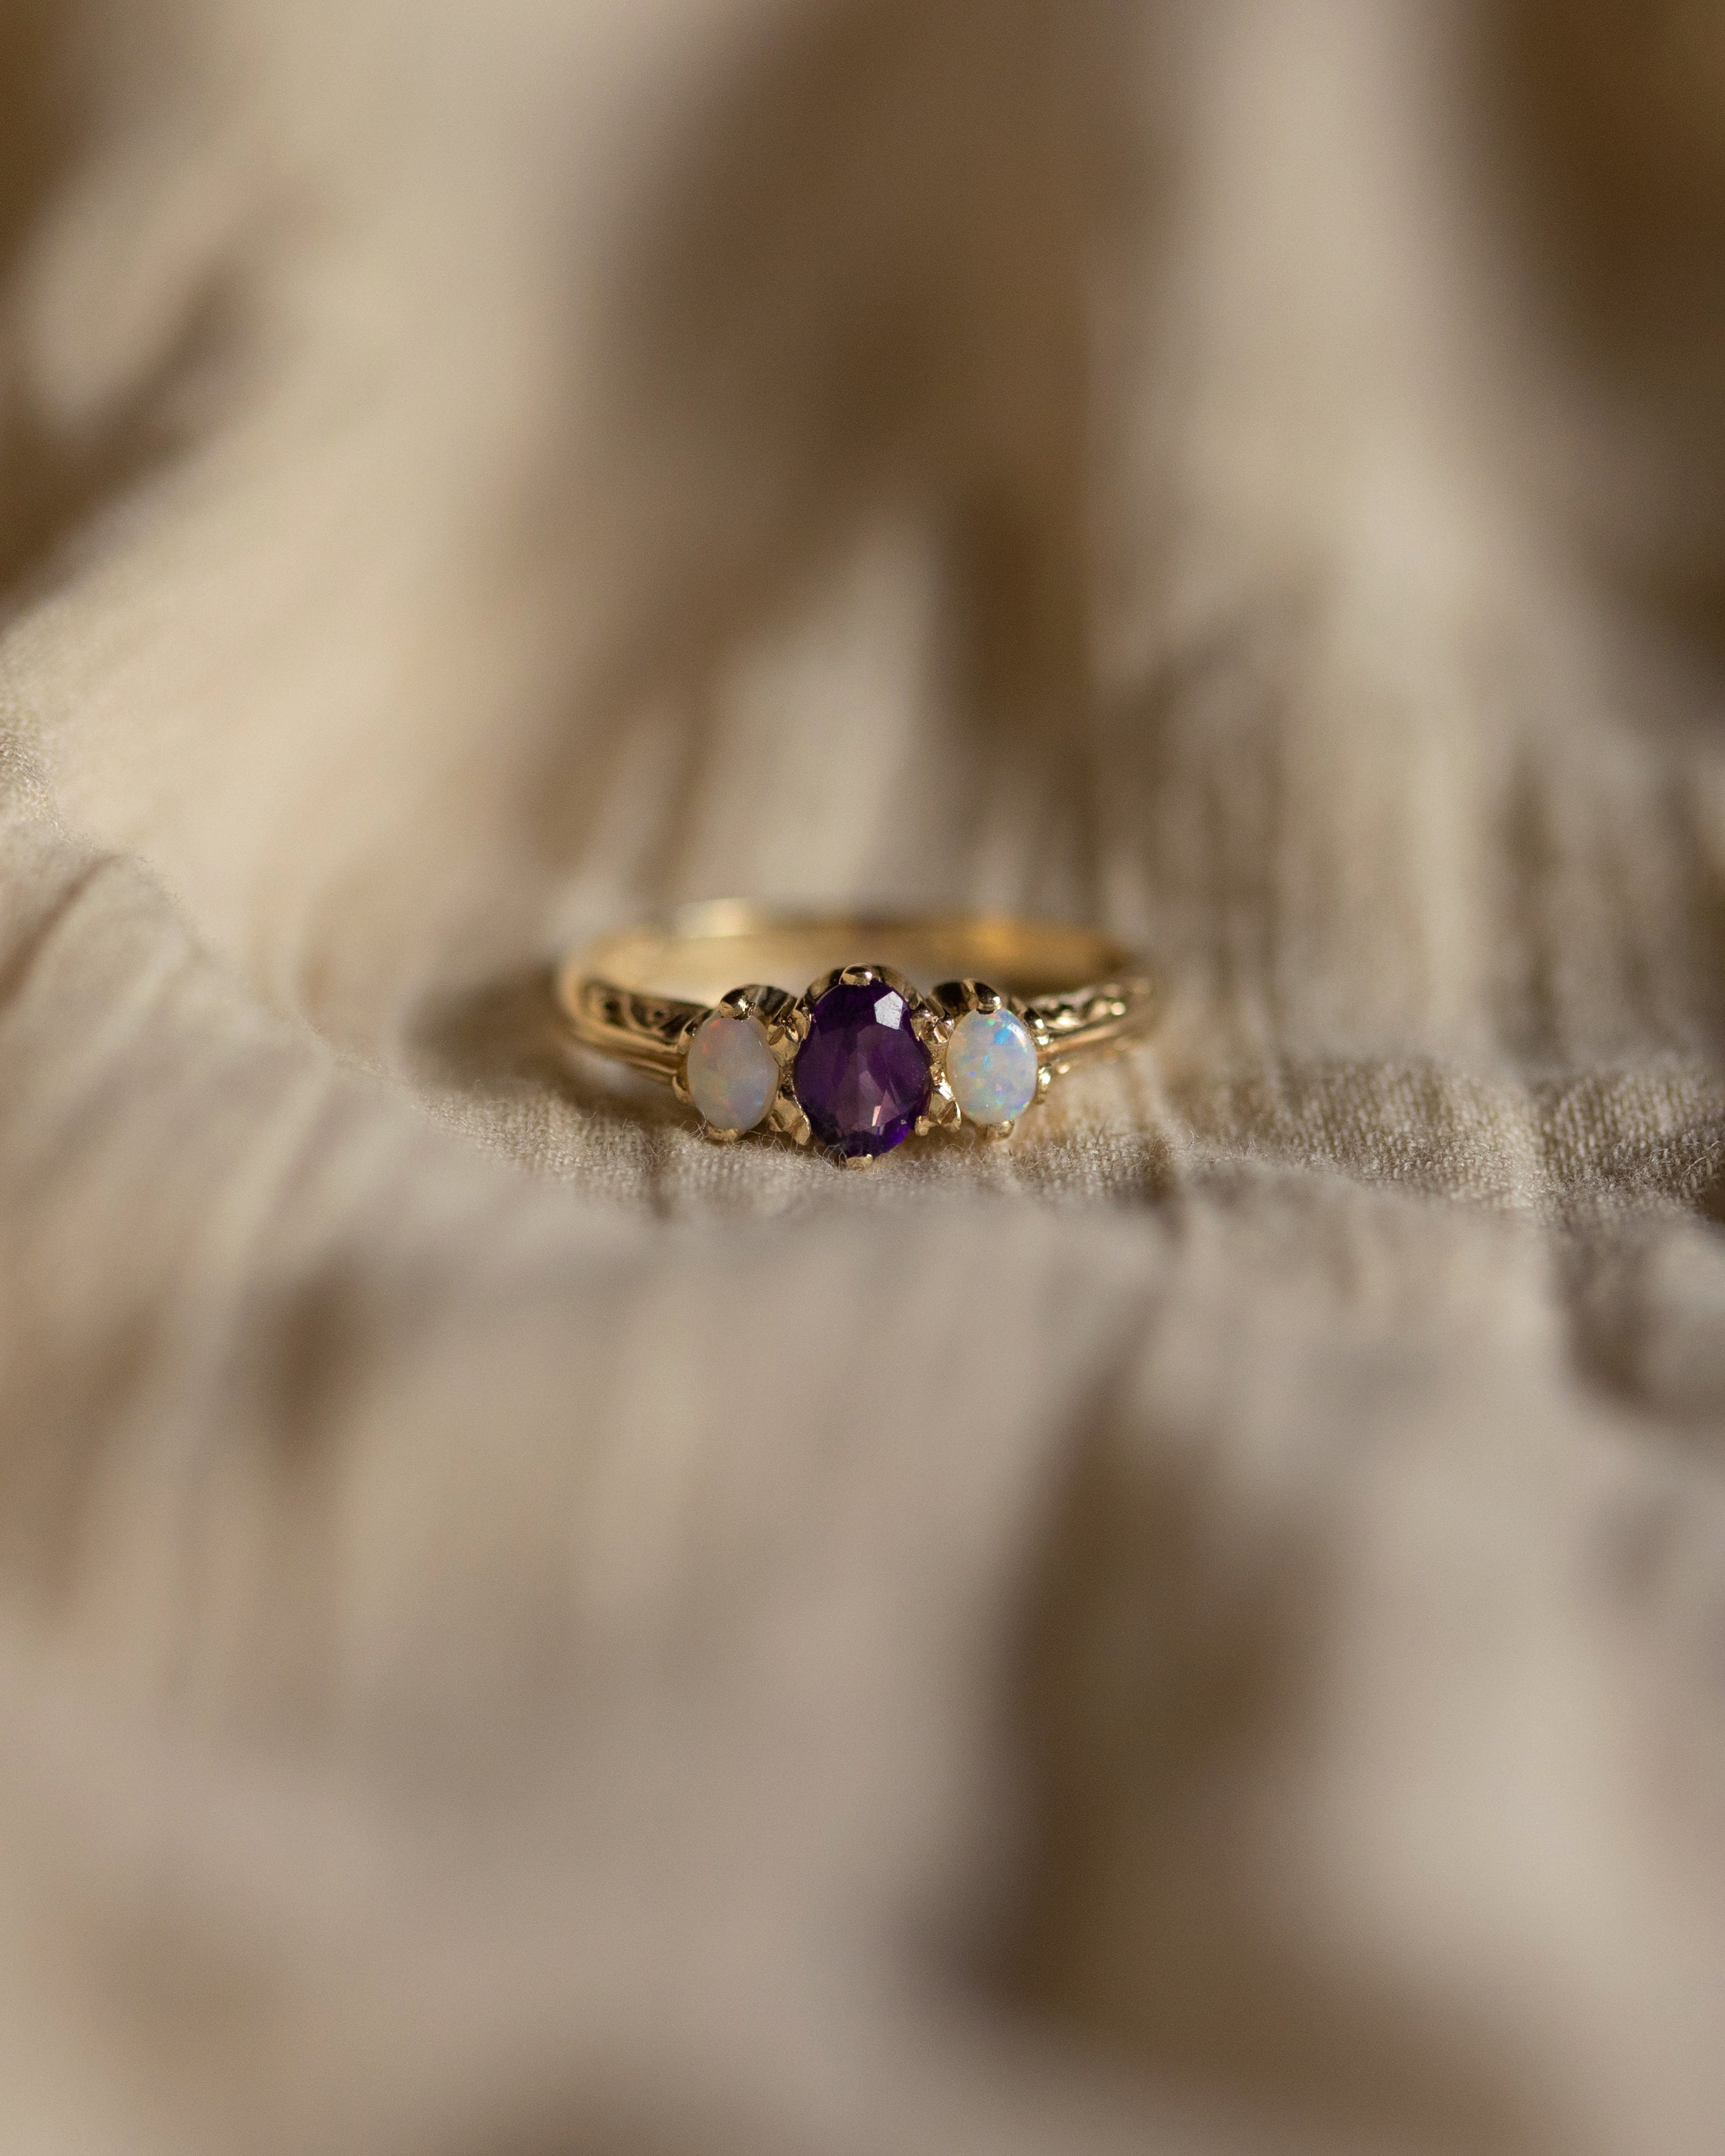 Norma Vintage 9ct Gold Amethyst & Opal Trilogy Ring